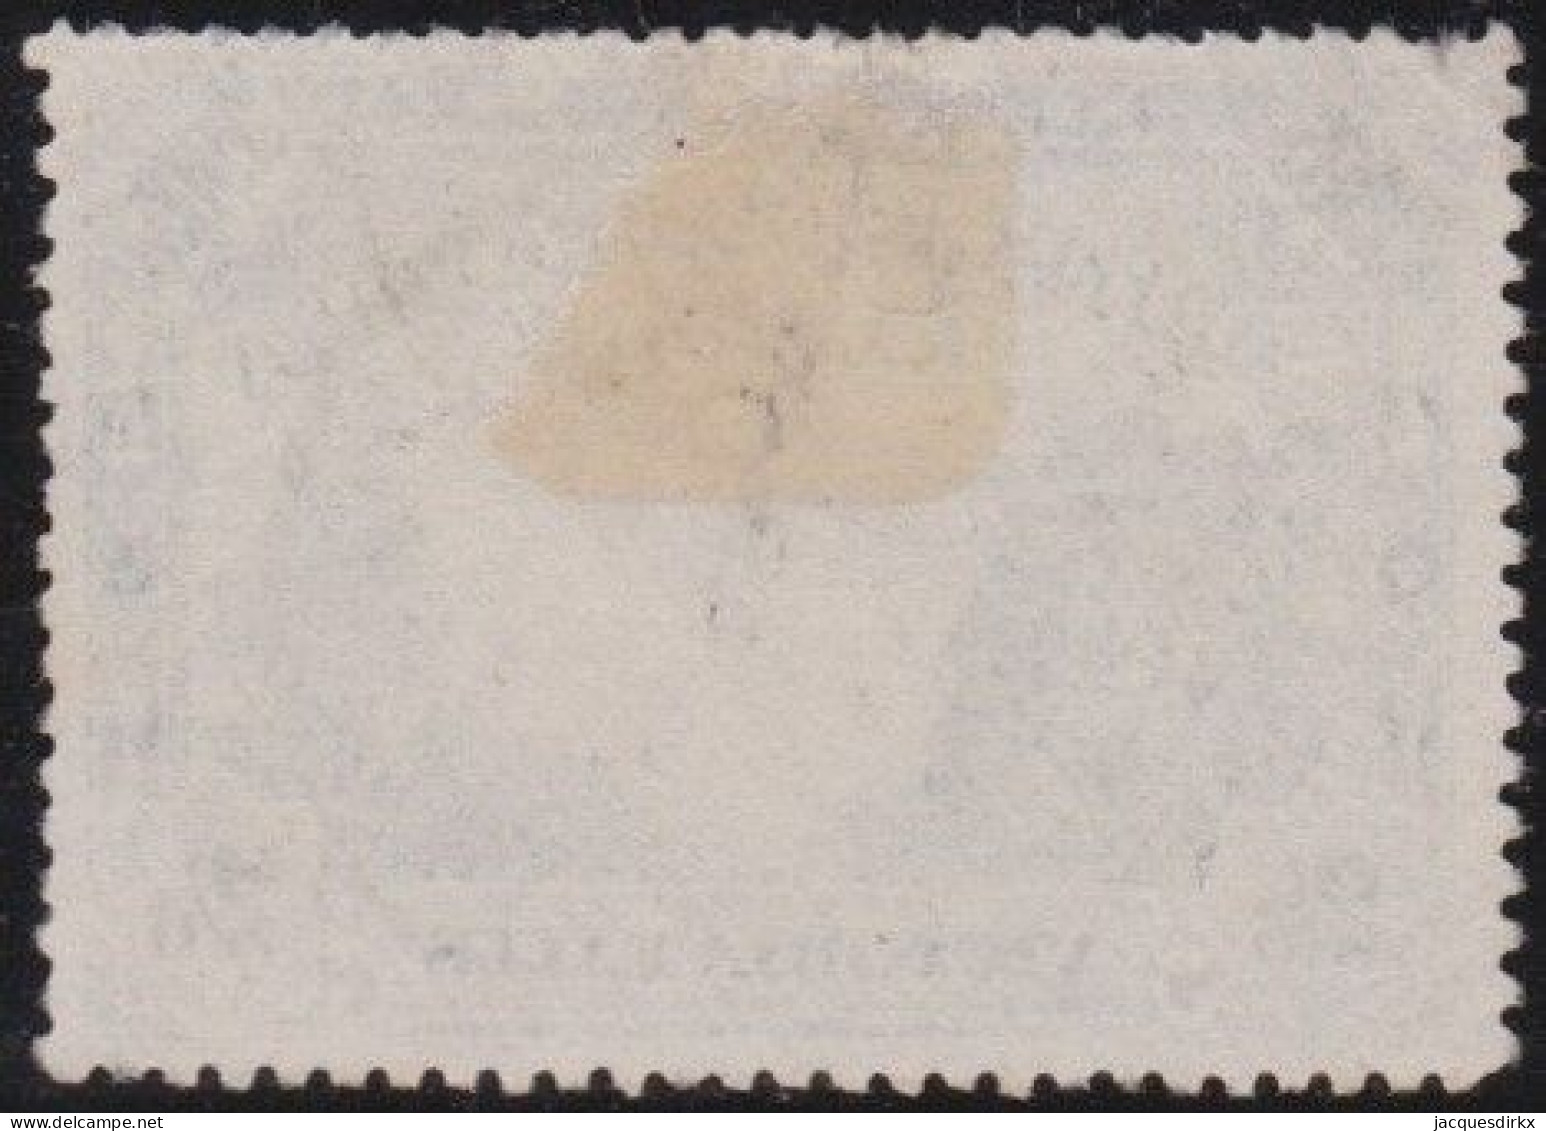 British South Africa Company      .    SG  .   98  (2 Scans)       .  O   .   Cancelled - Oblitérés